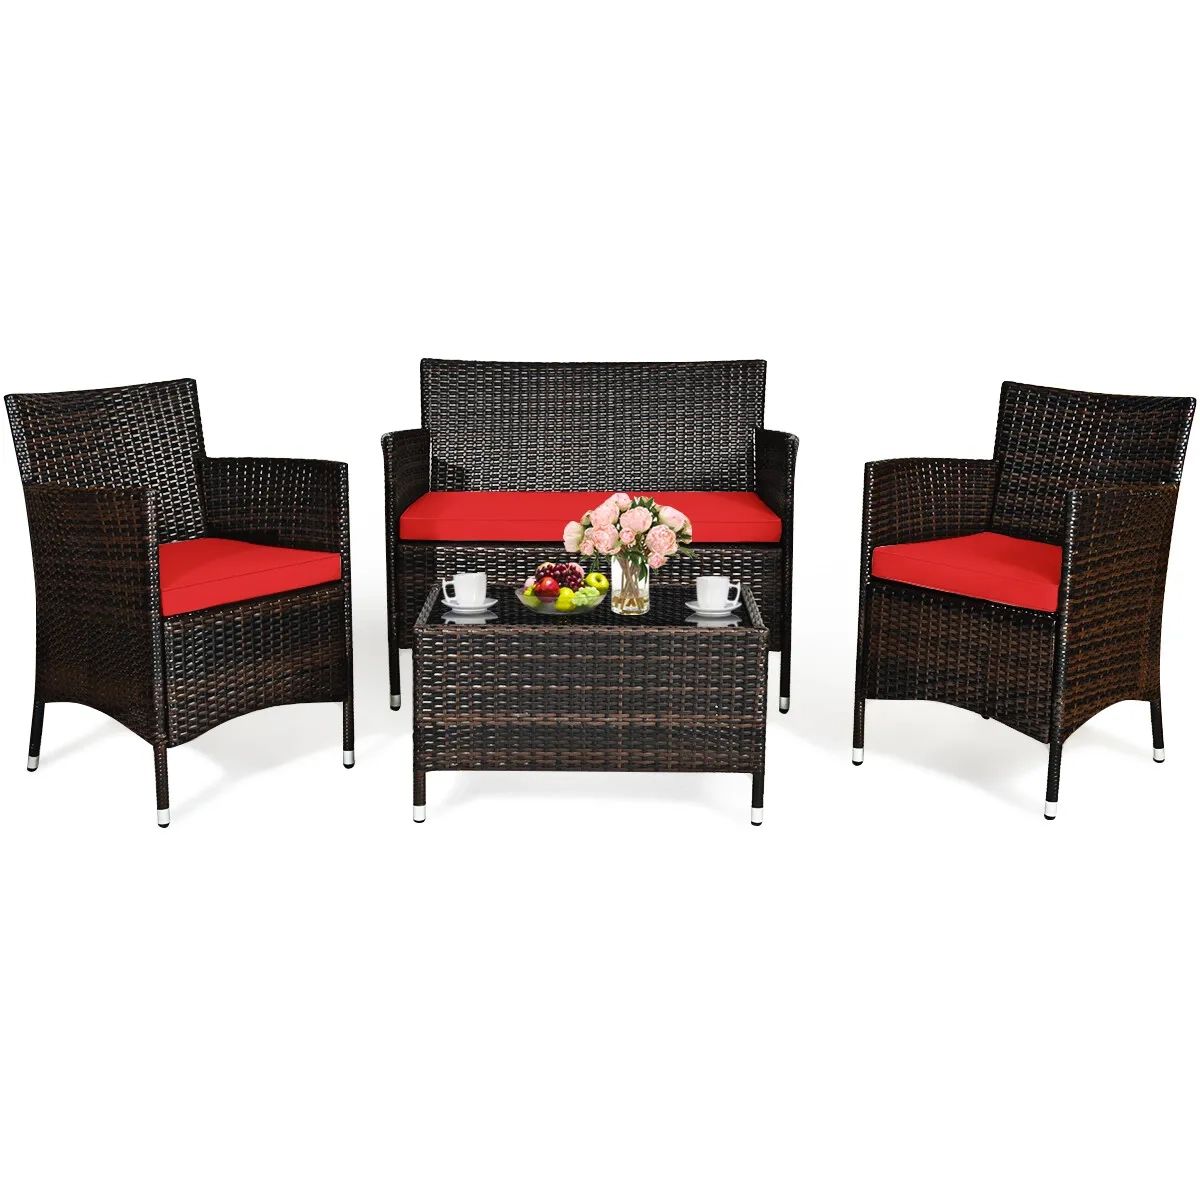 4pcs Rattan Patio Furniture Set Cushioned Sofa Chair Coffee Table Red | Ebay In 4pcs Rattan Patio Coffee Tables (Photo 7 of 15)